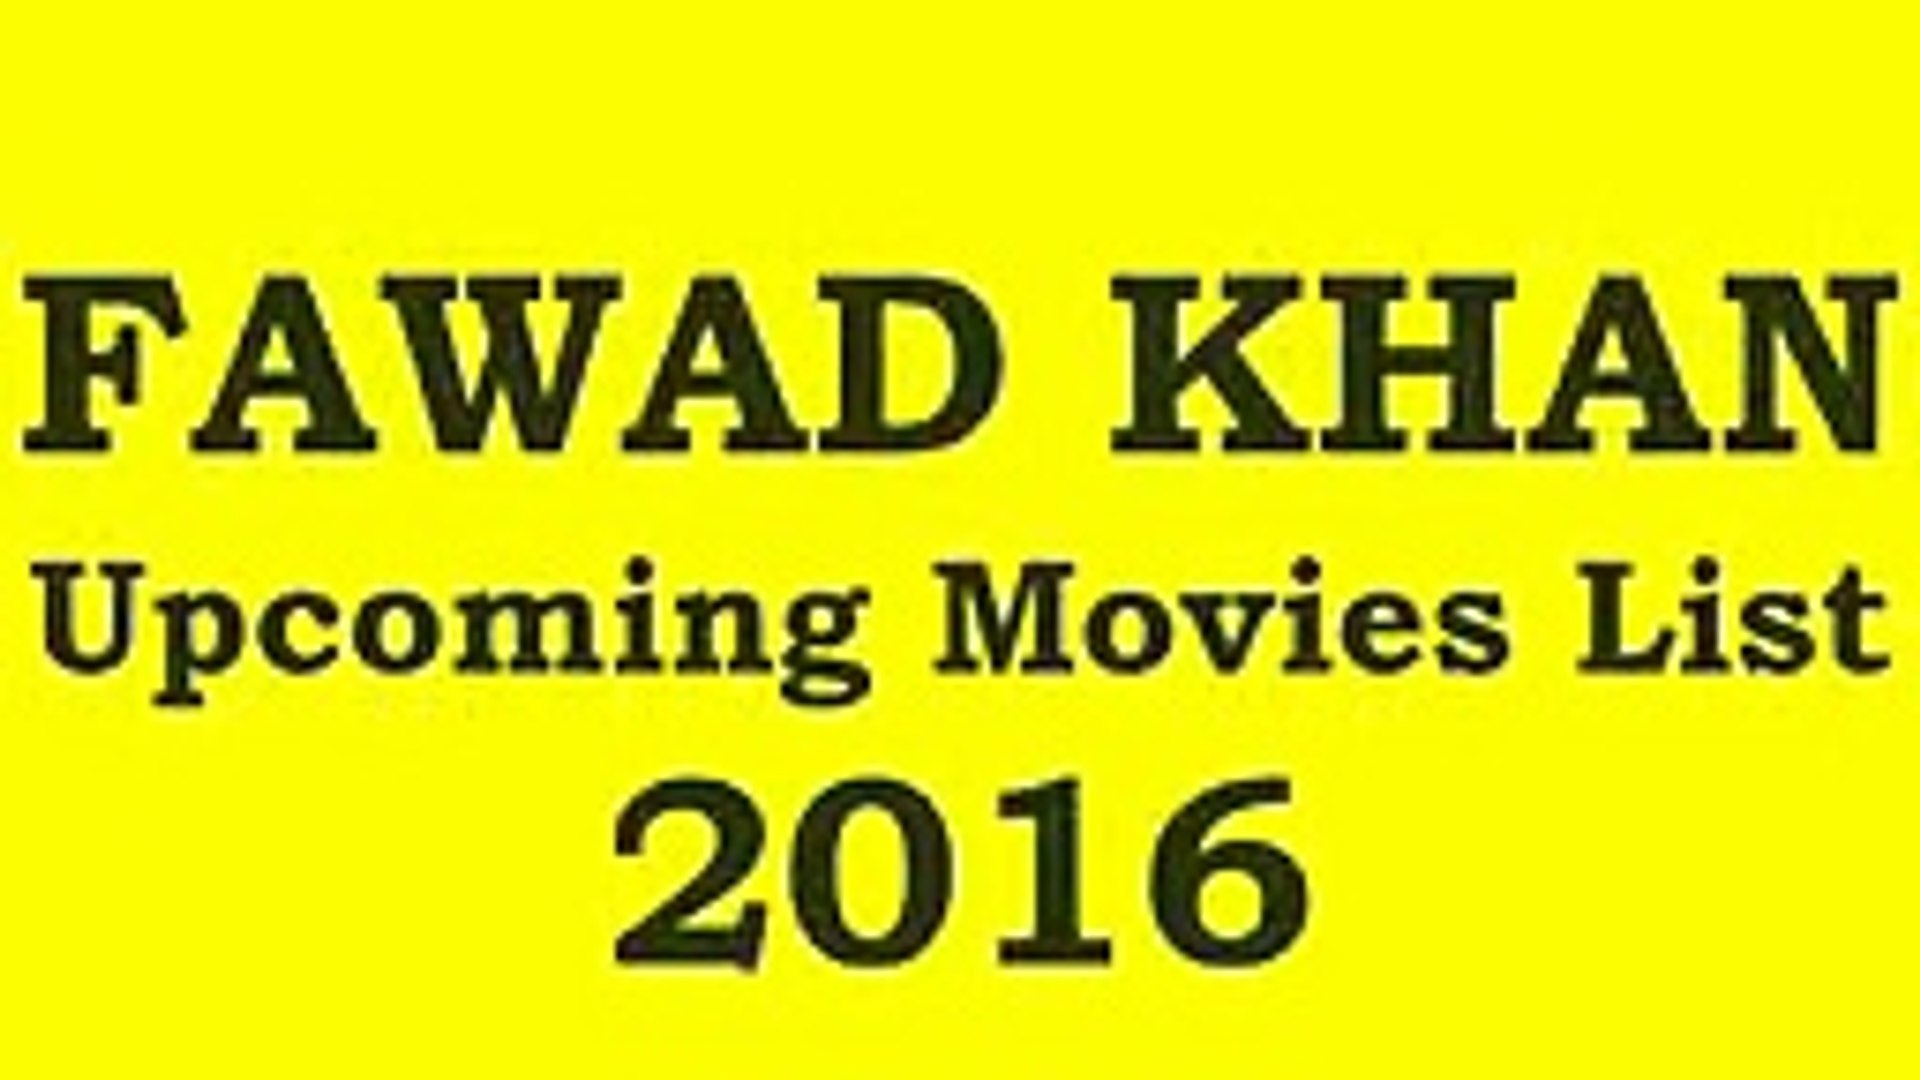 Fawad Khan Upcoming Movies 2016 top songs best songs new songs upcoming songs latest songs sad songs